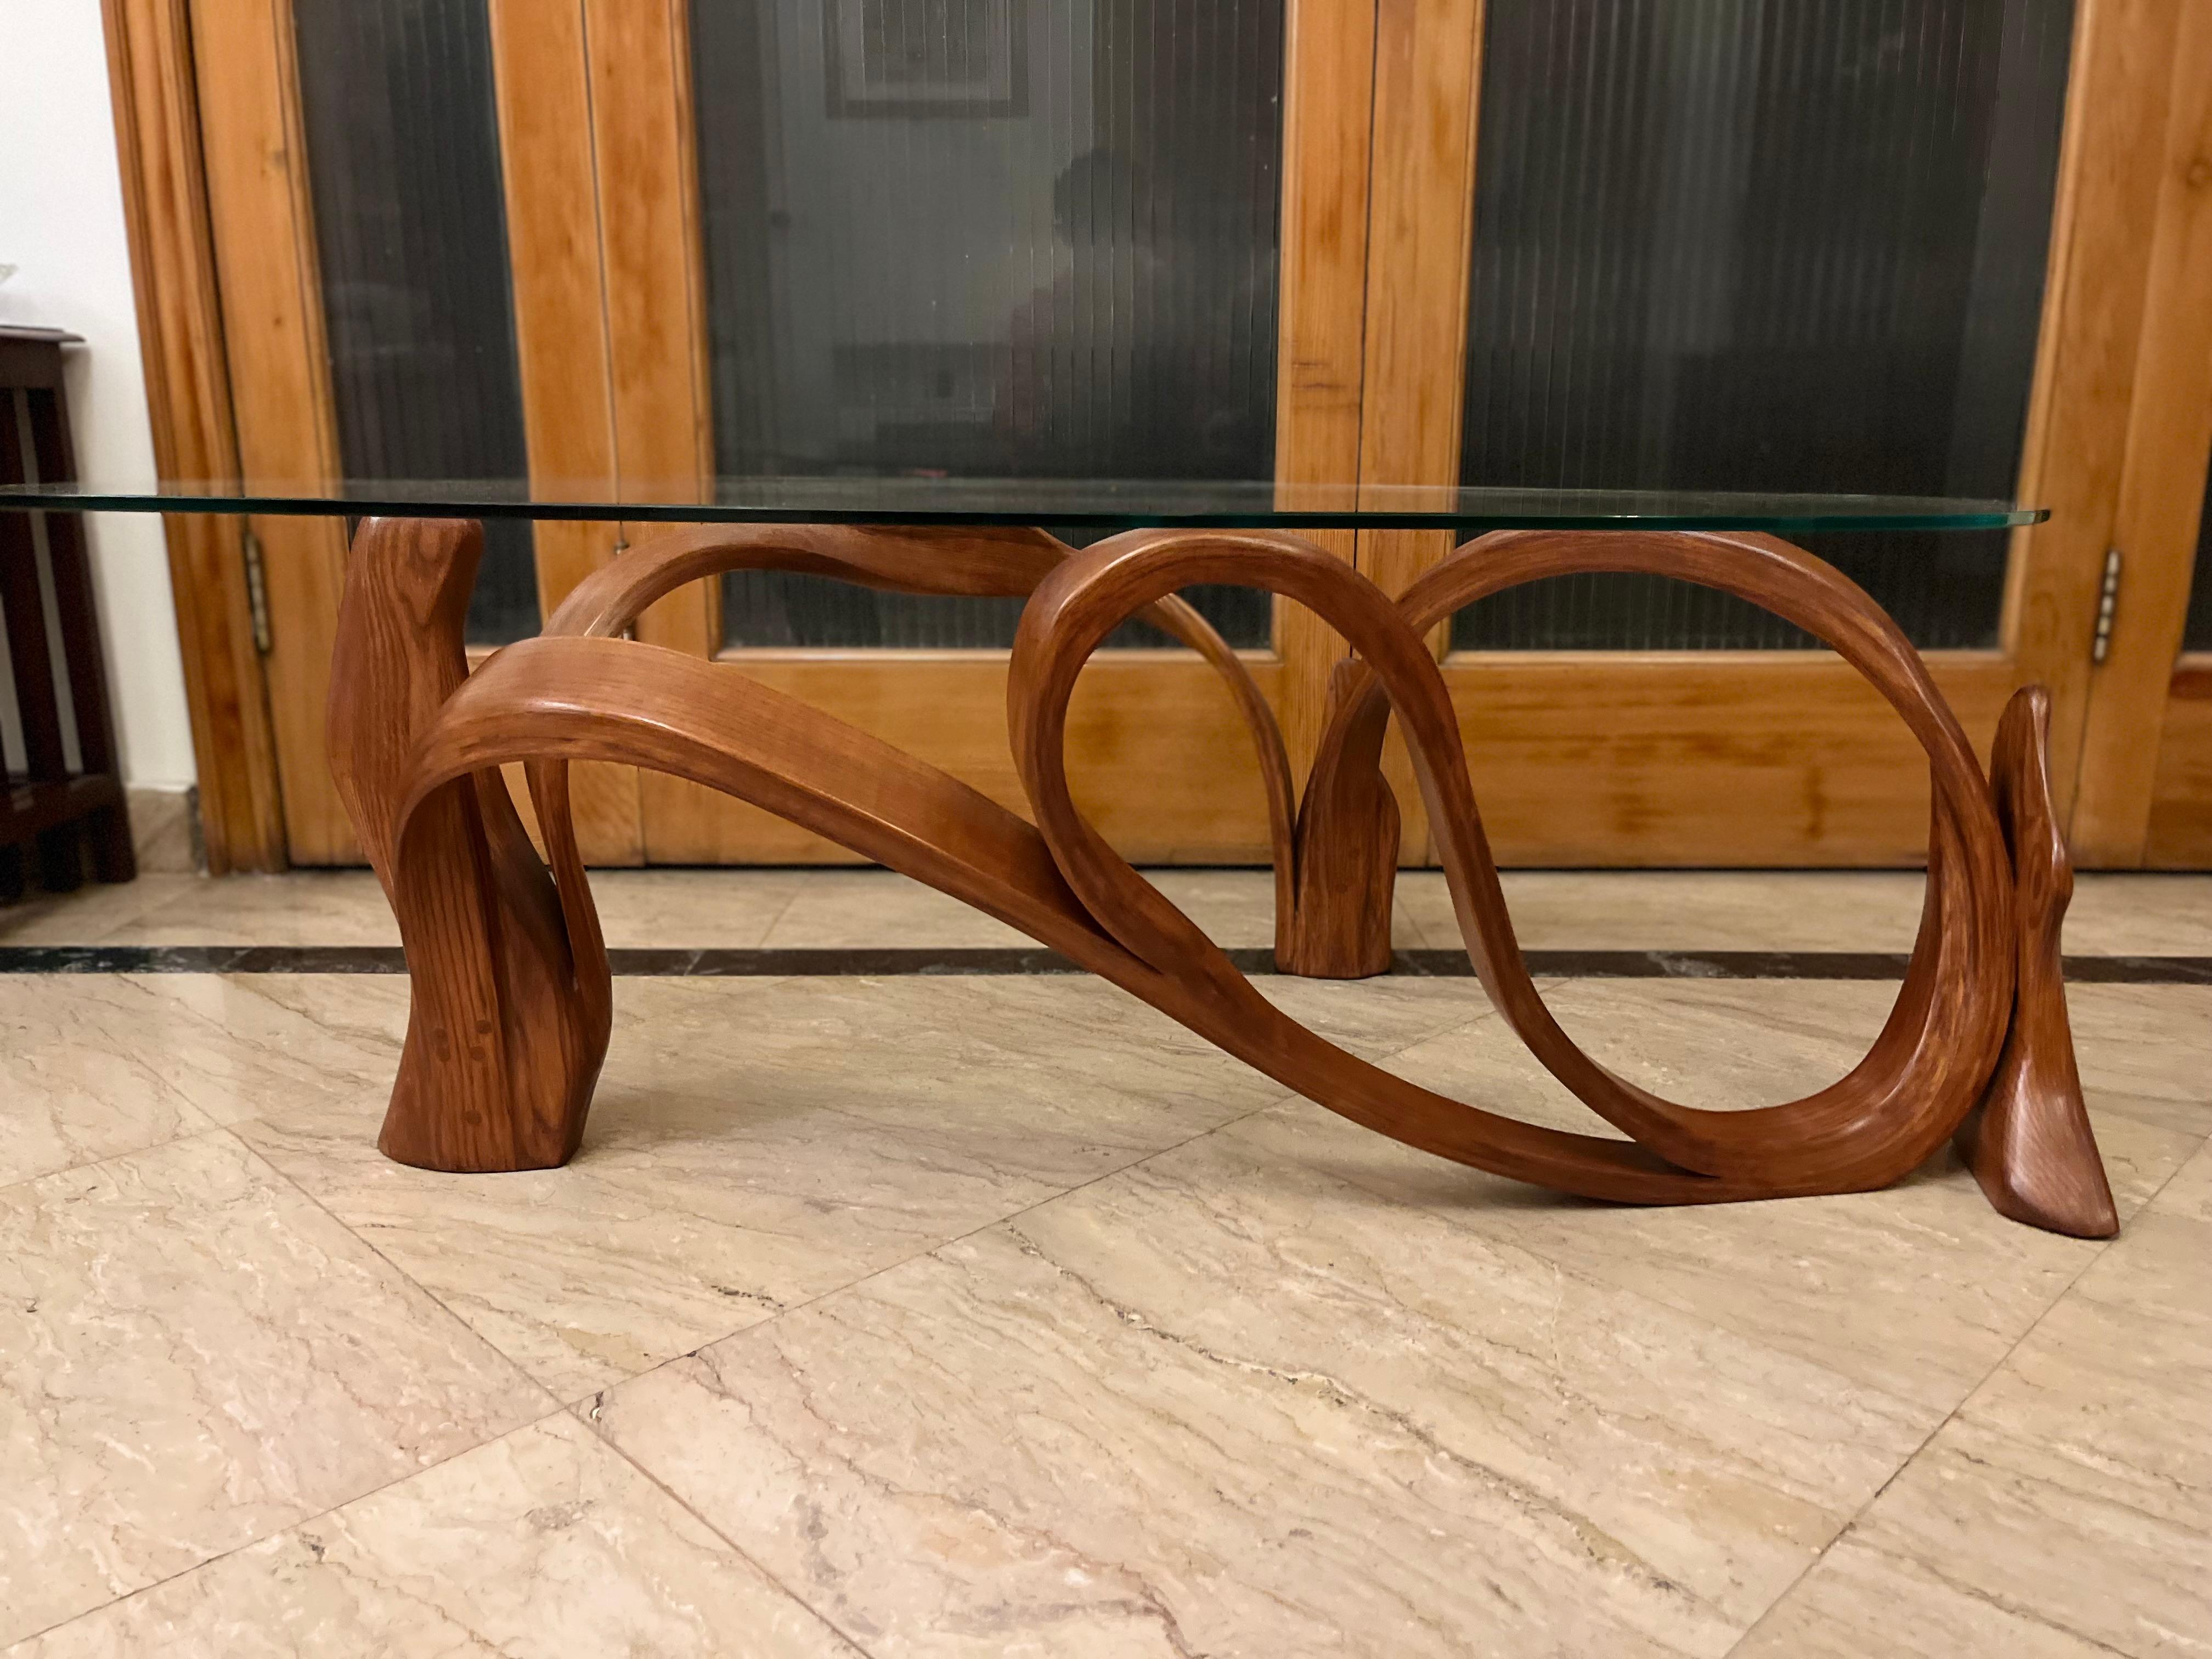 The Collis Centre Table is designed using the ancient Japanese technique of wood bending. At Raka Studio we create designs using this technique which are fluid in their form and are coherent with the laws of nature. The base design is constantly in